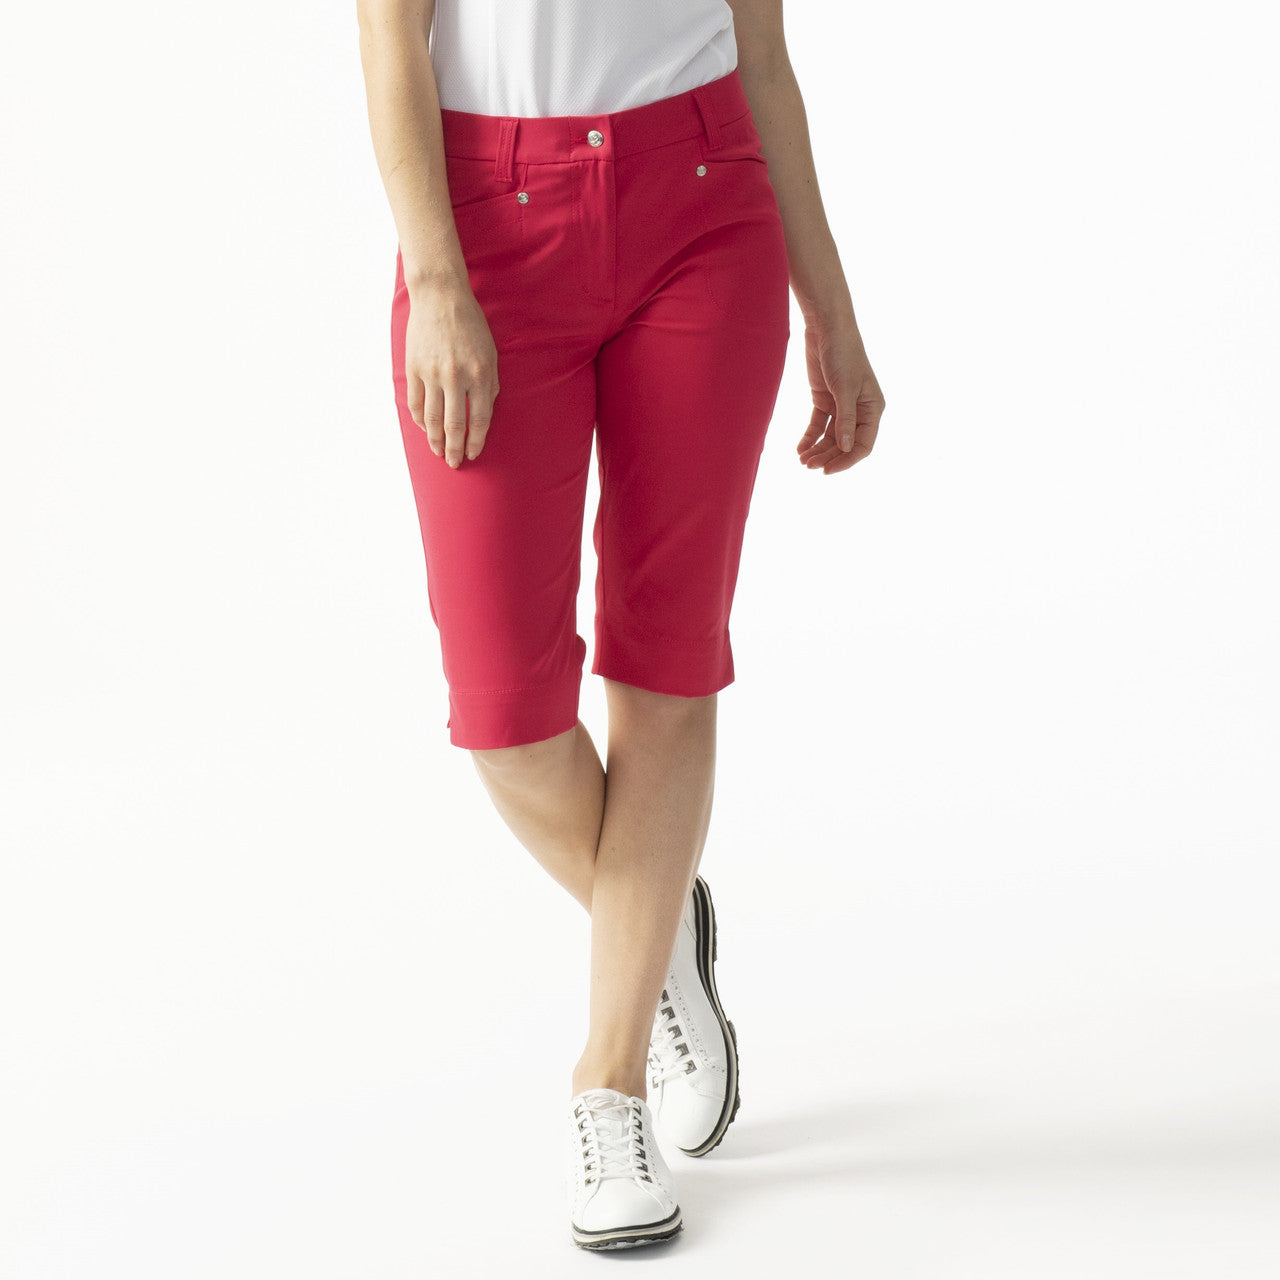 Daily Sports- Lyric City Shorts Berry Red (Style#: 373/261-868)